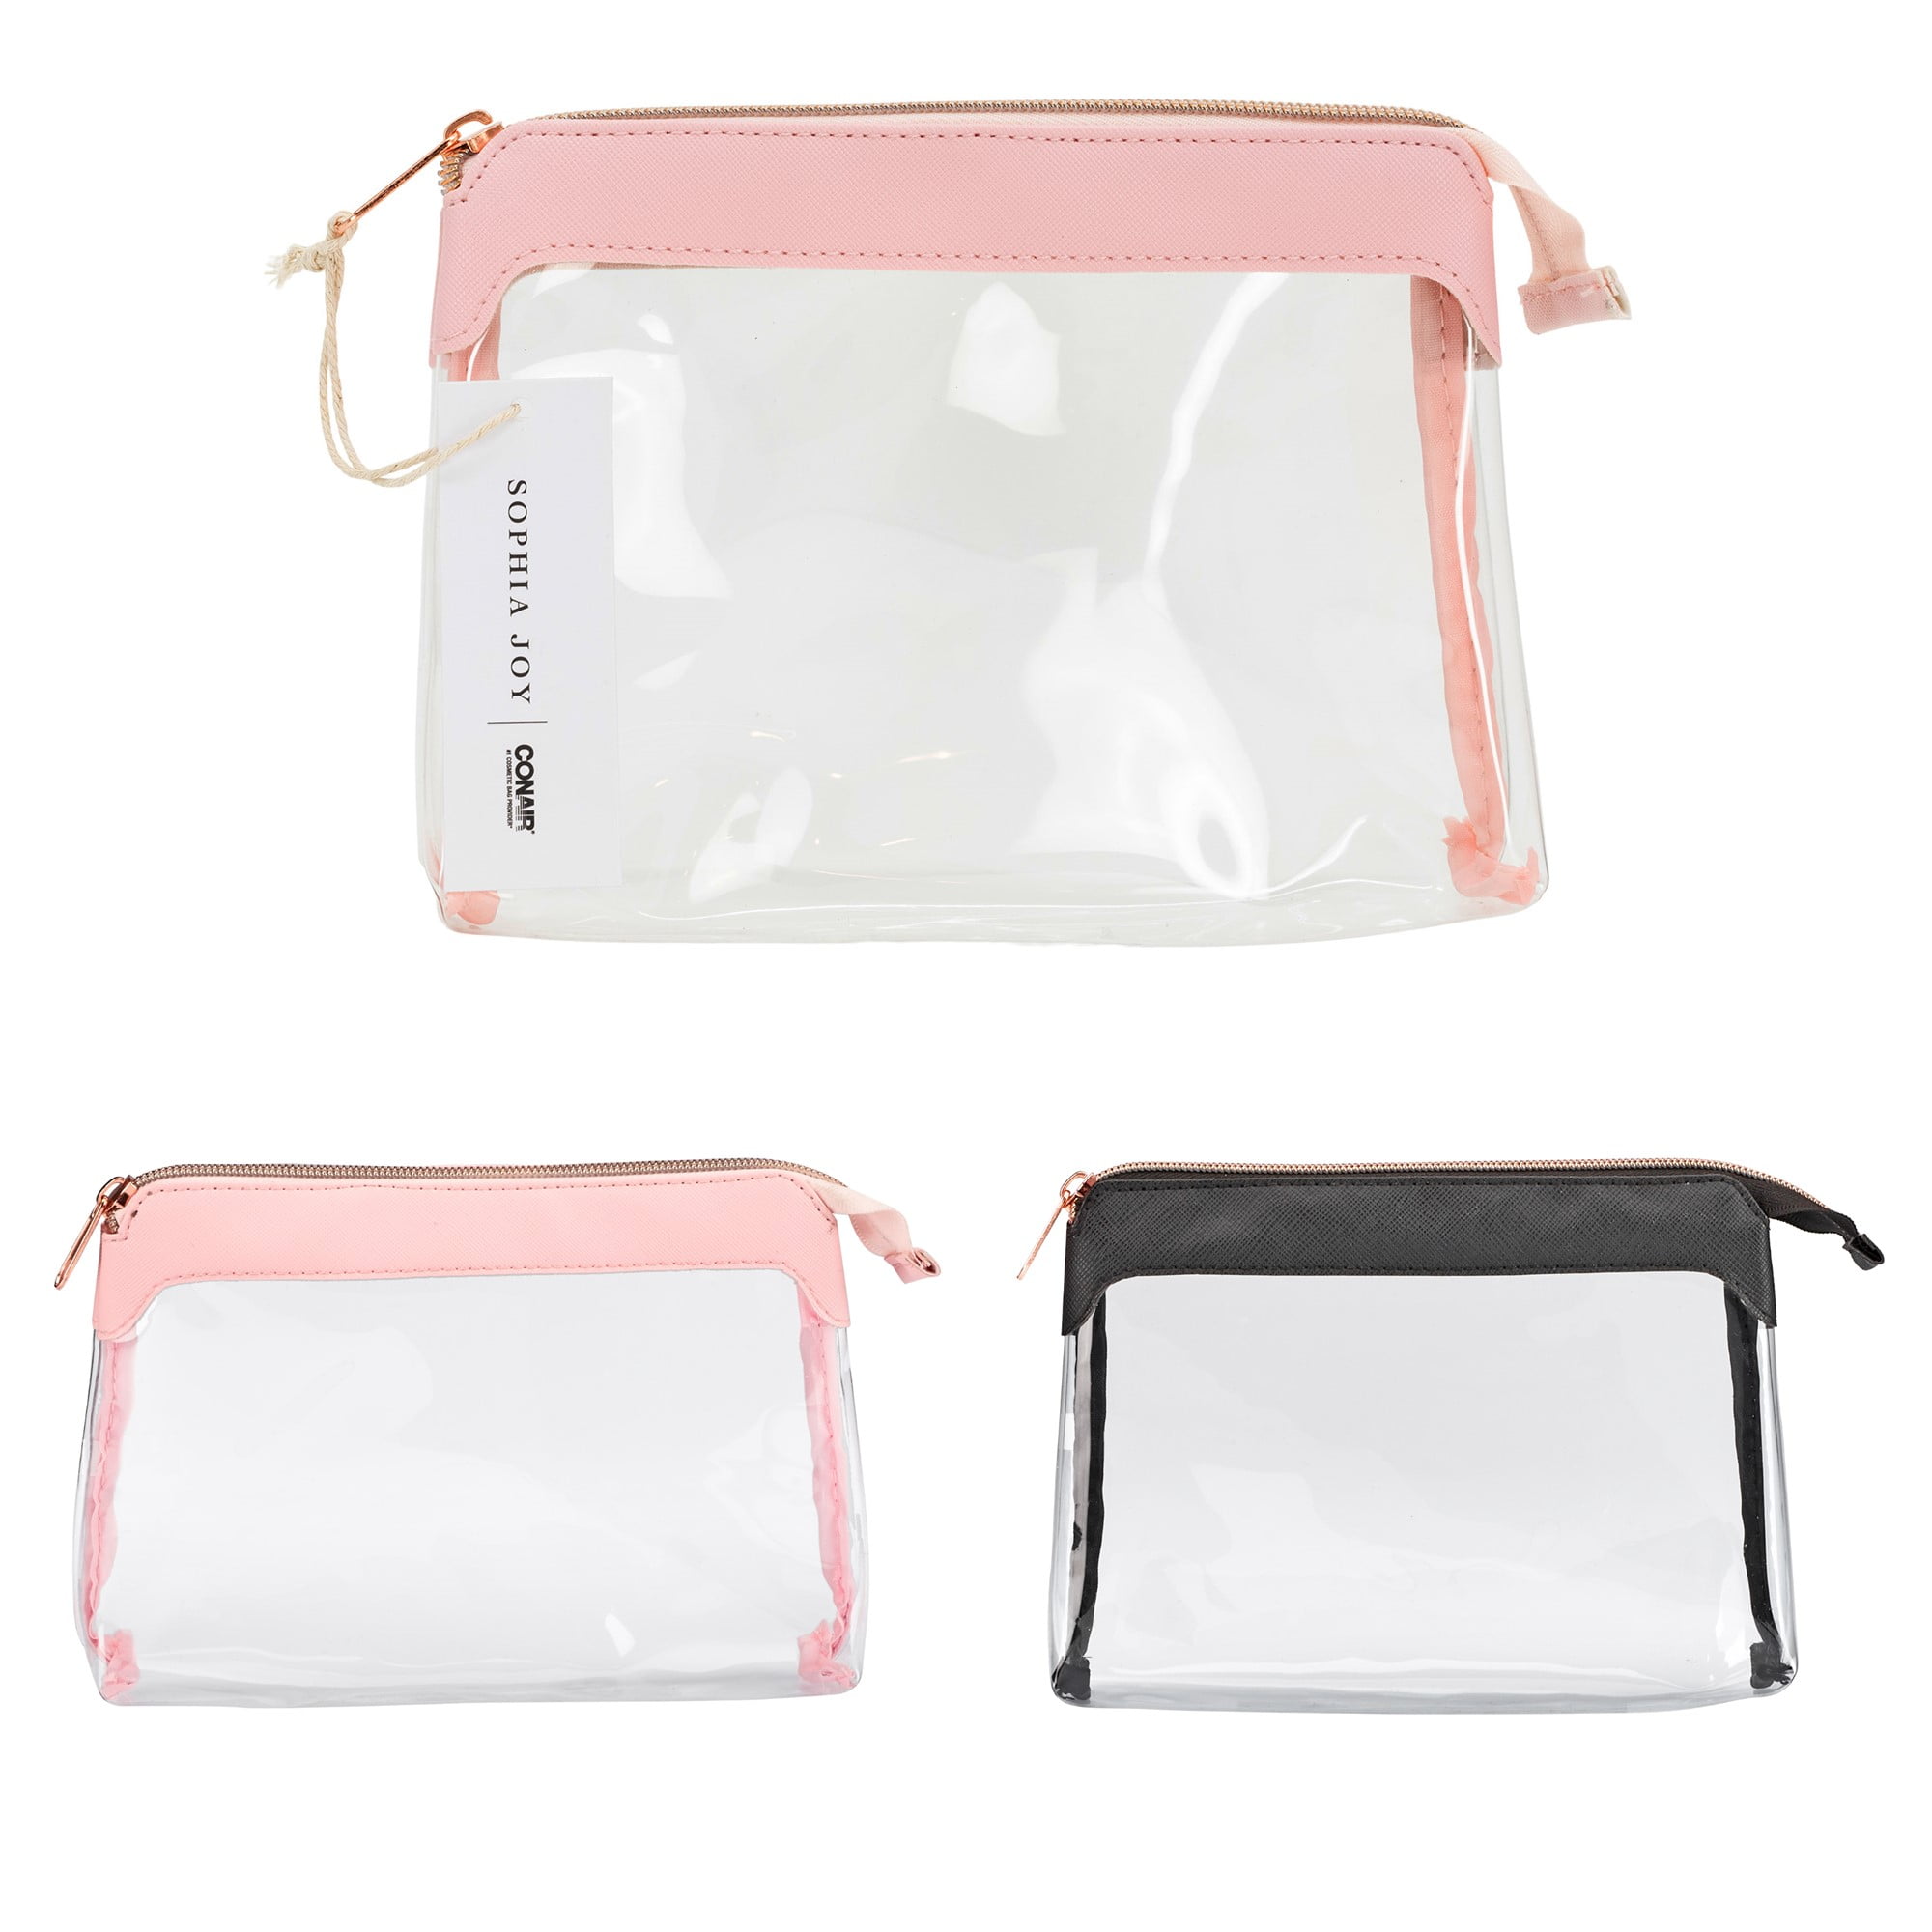 Basics Zippered Travel Makeup & Accessory Rectangle Carrying Clutch ...